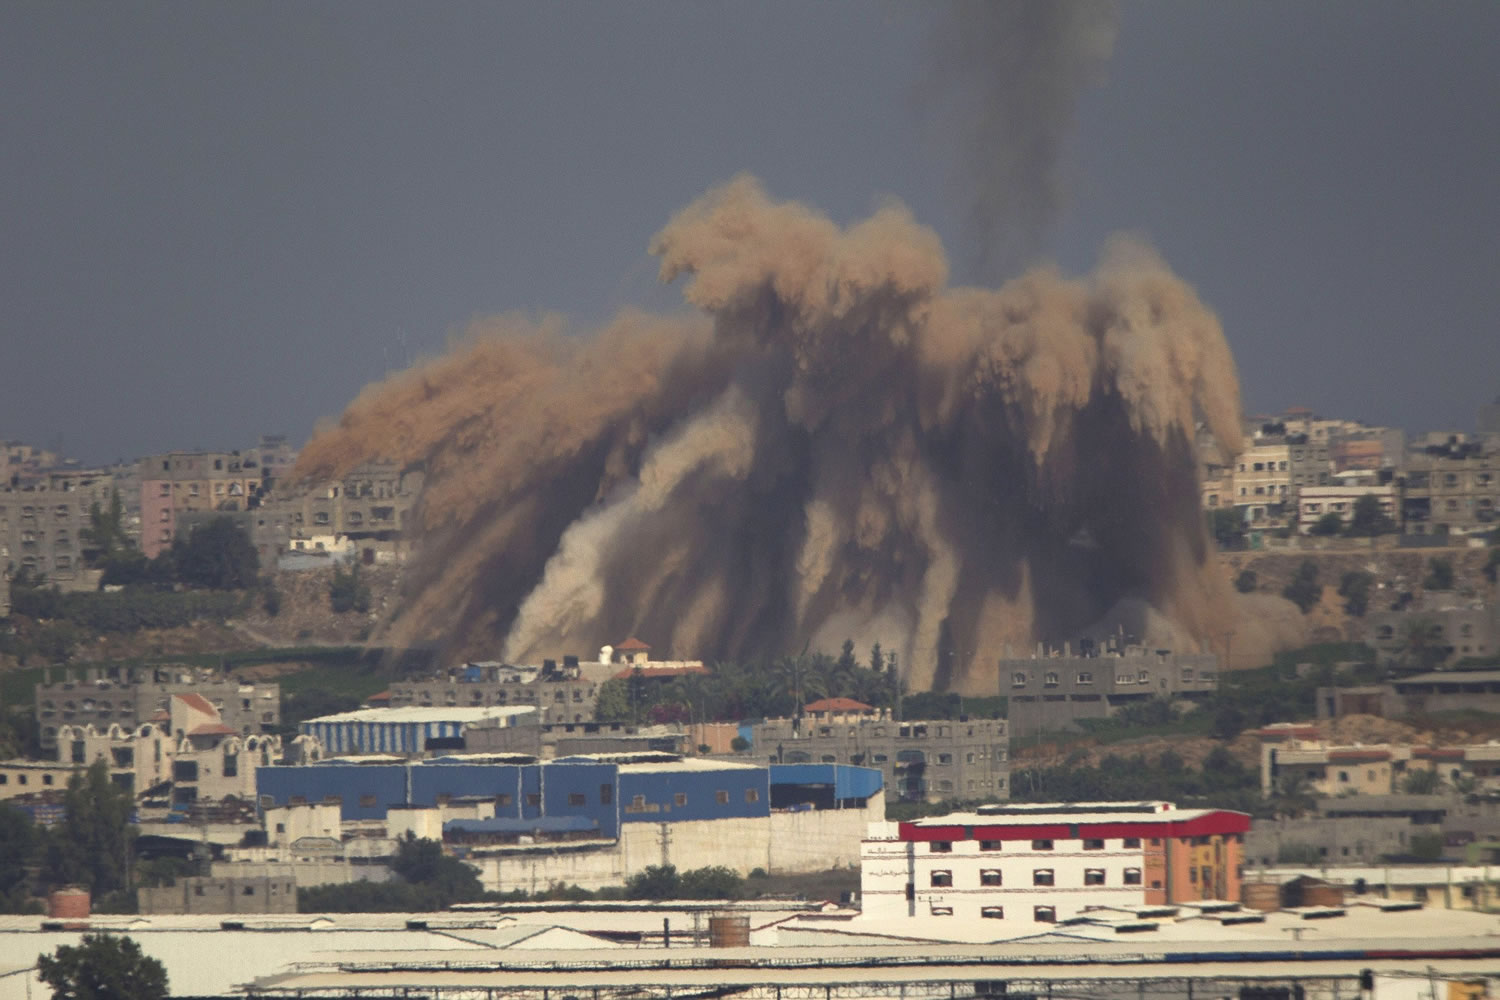 Smoke and debris rise after an Israeli airstrike on the Gaza Strip on Wednesday.